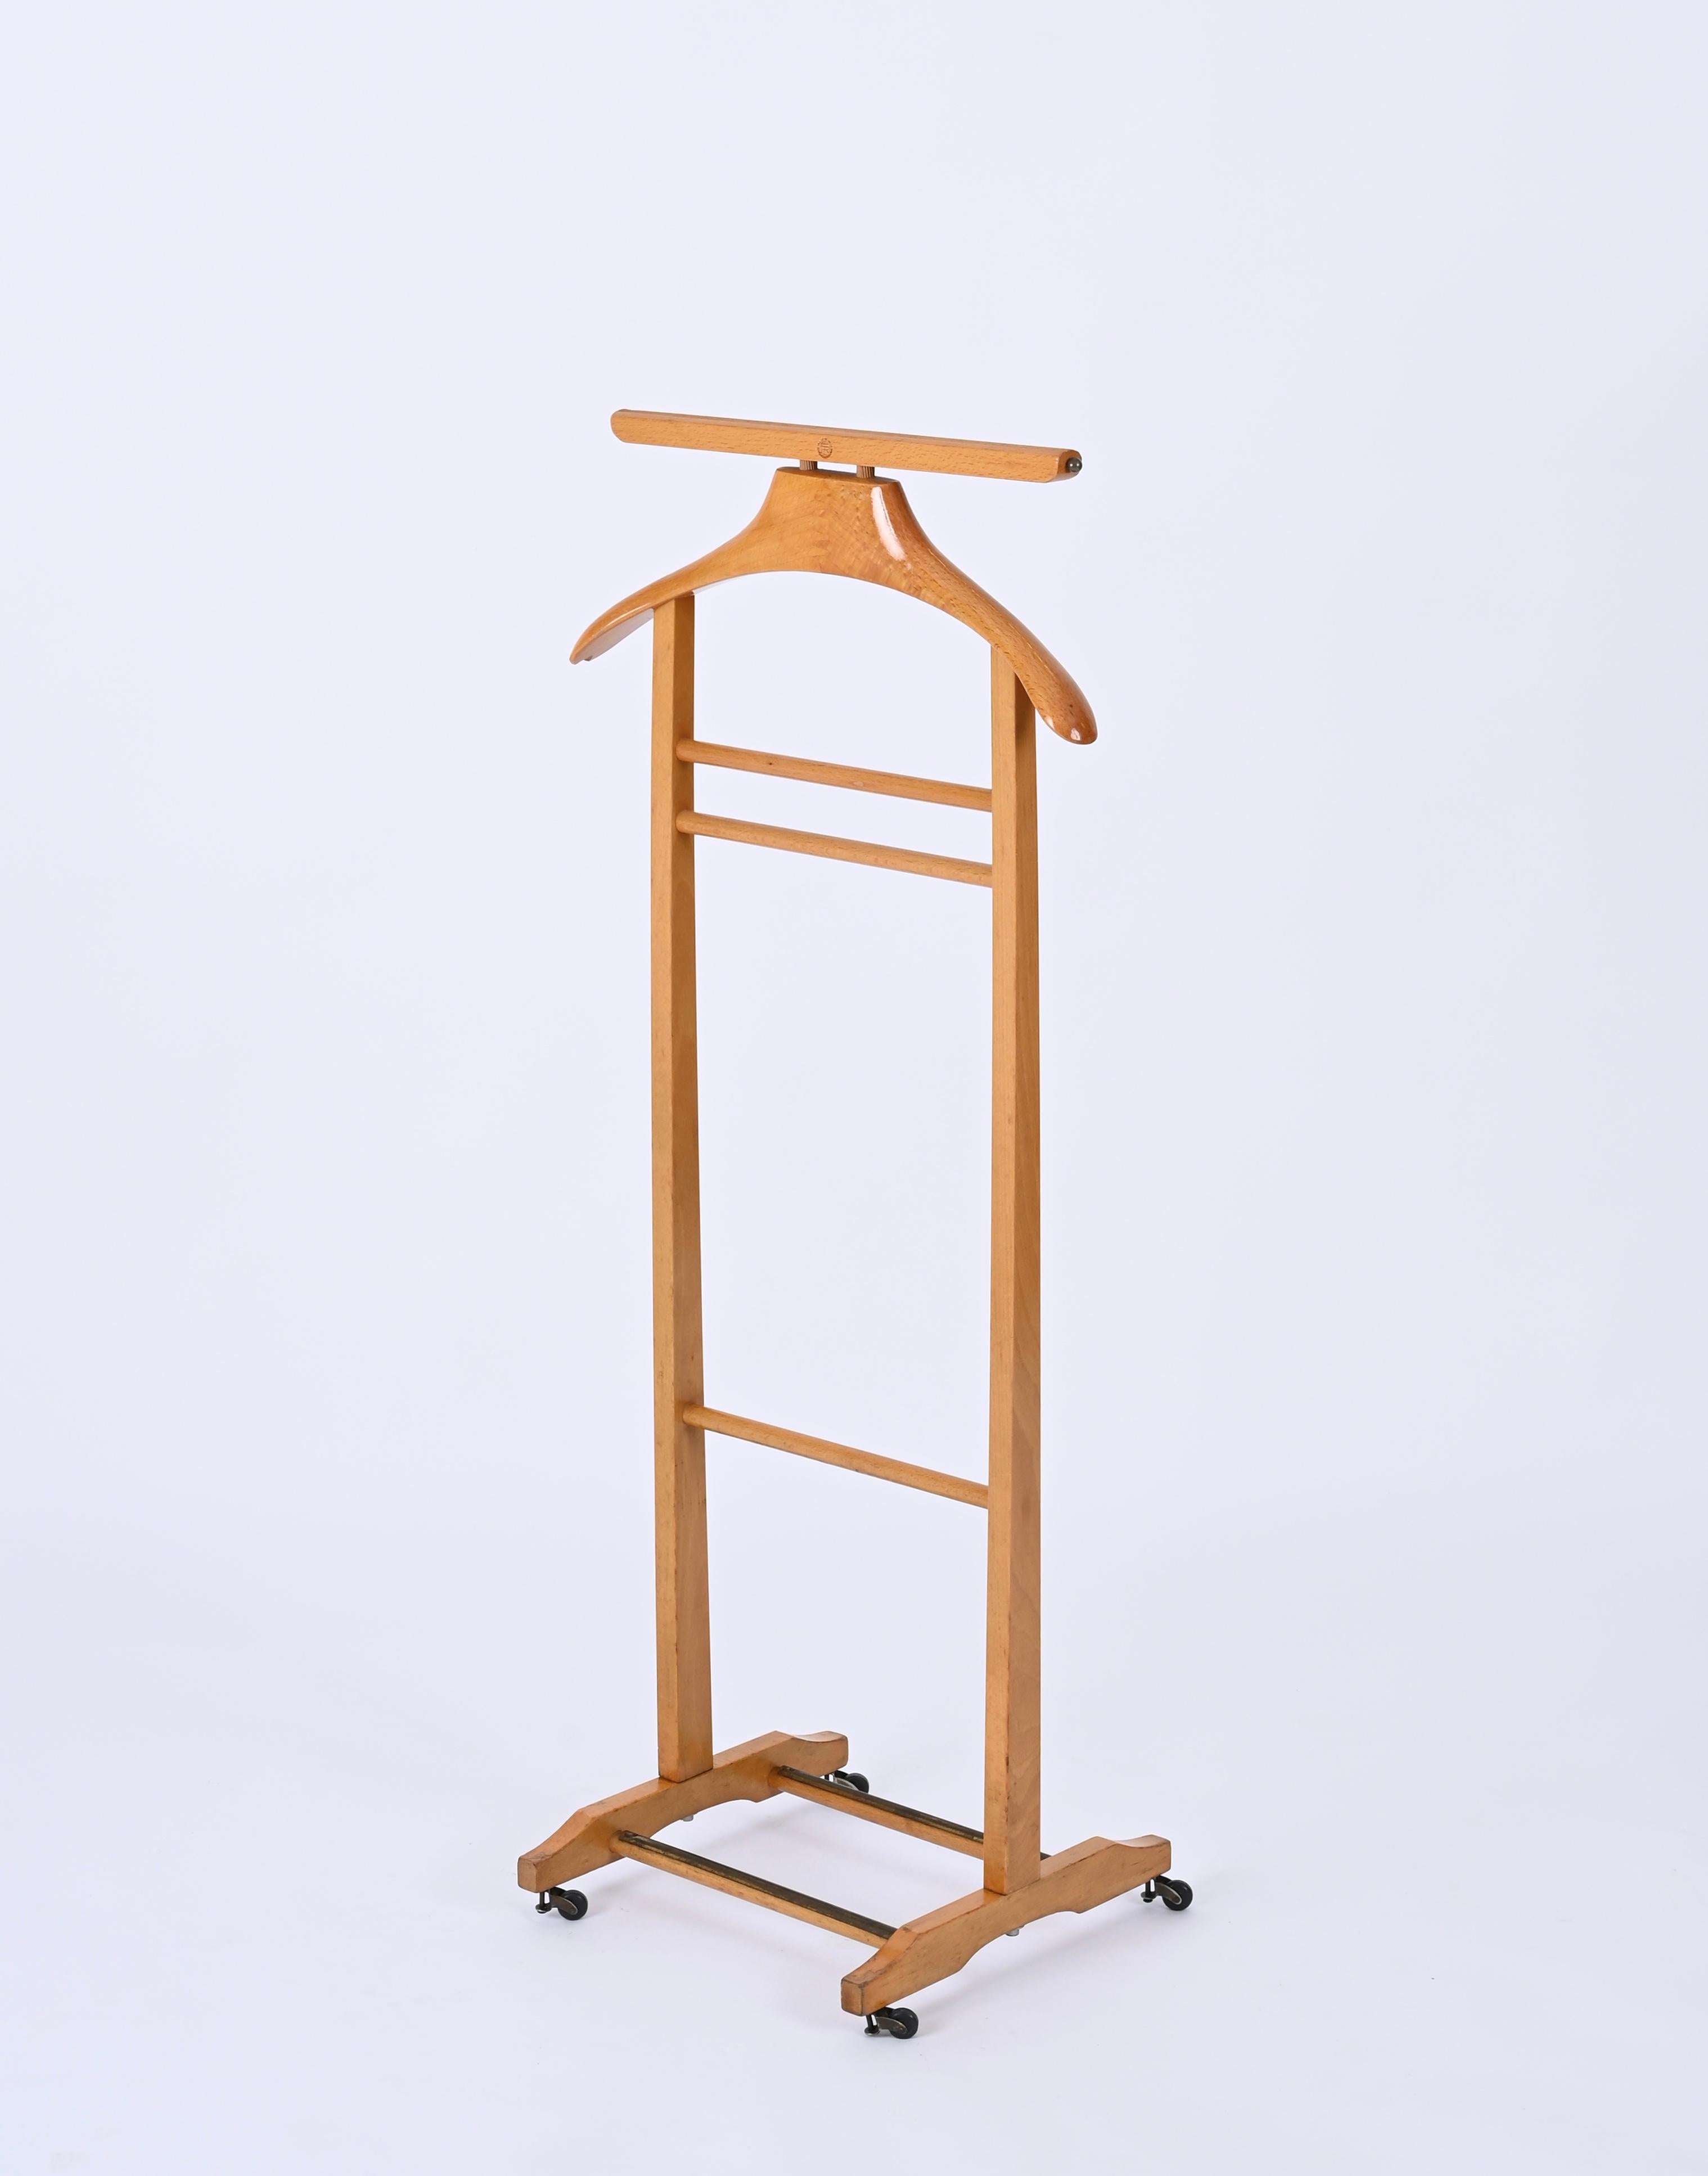 Very rare midcentury valet stand in a stunning beechwood and brass. This gorgeous item was produced during the 1950s by the Reguitti Brothers in Italy.

This unique coat rack is made of beechwood and features two solid brass hooks for belts or ties.